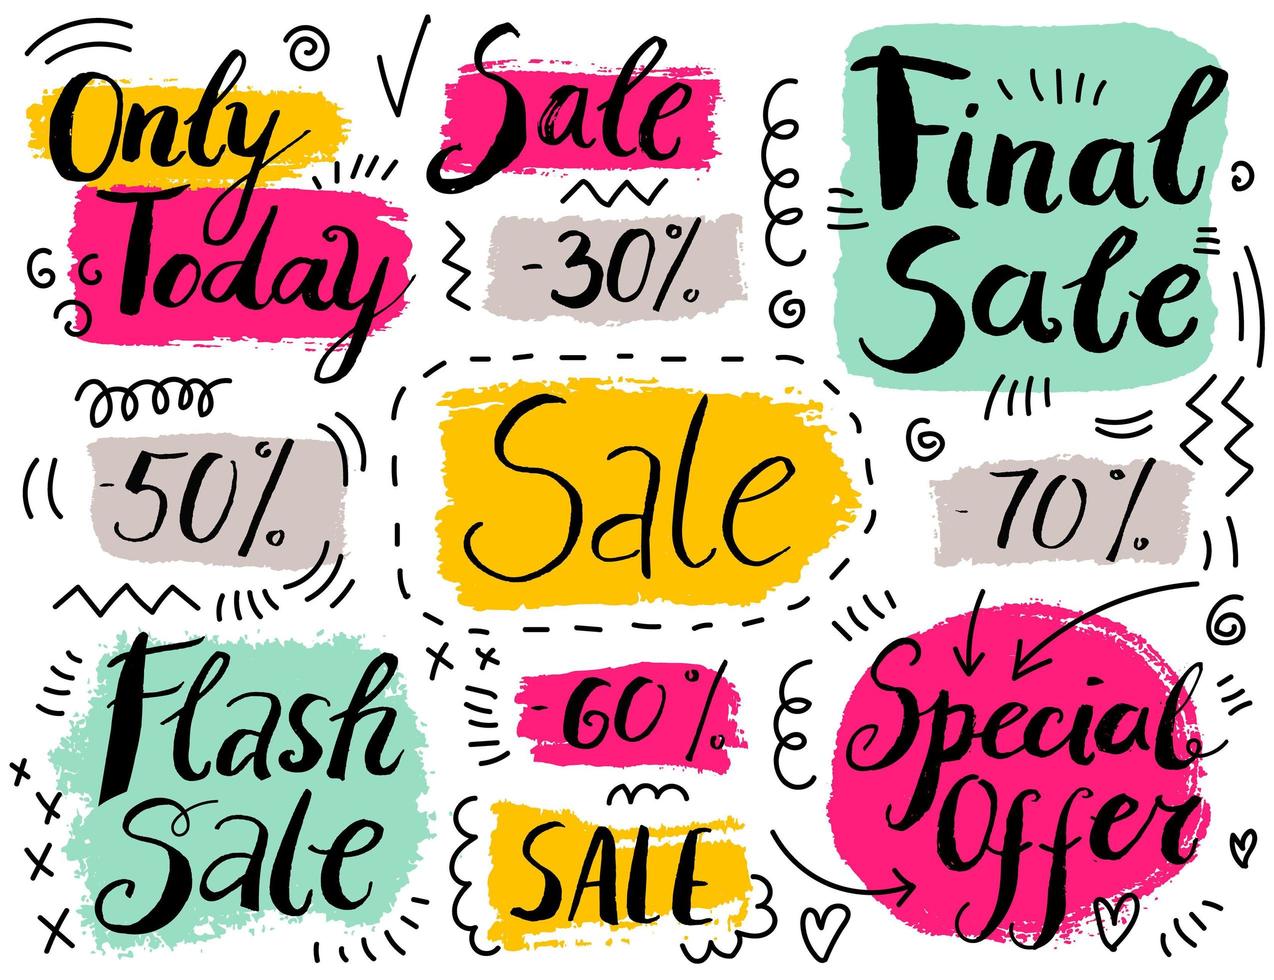 Vector set of hand drawn doodle sale banners, badges, tags, illustrations. Typography Background. Handmade calligraphy. Brush lettering compositions